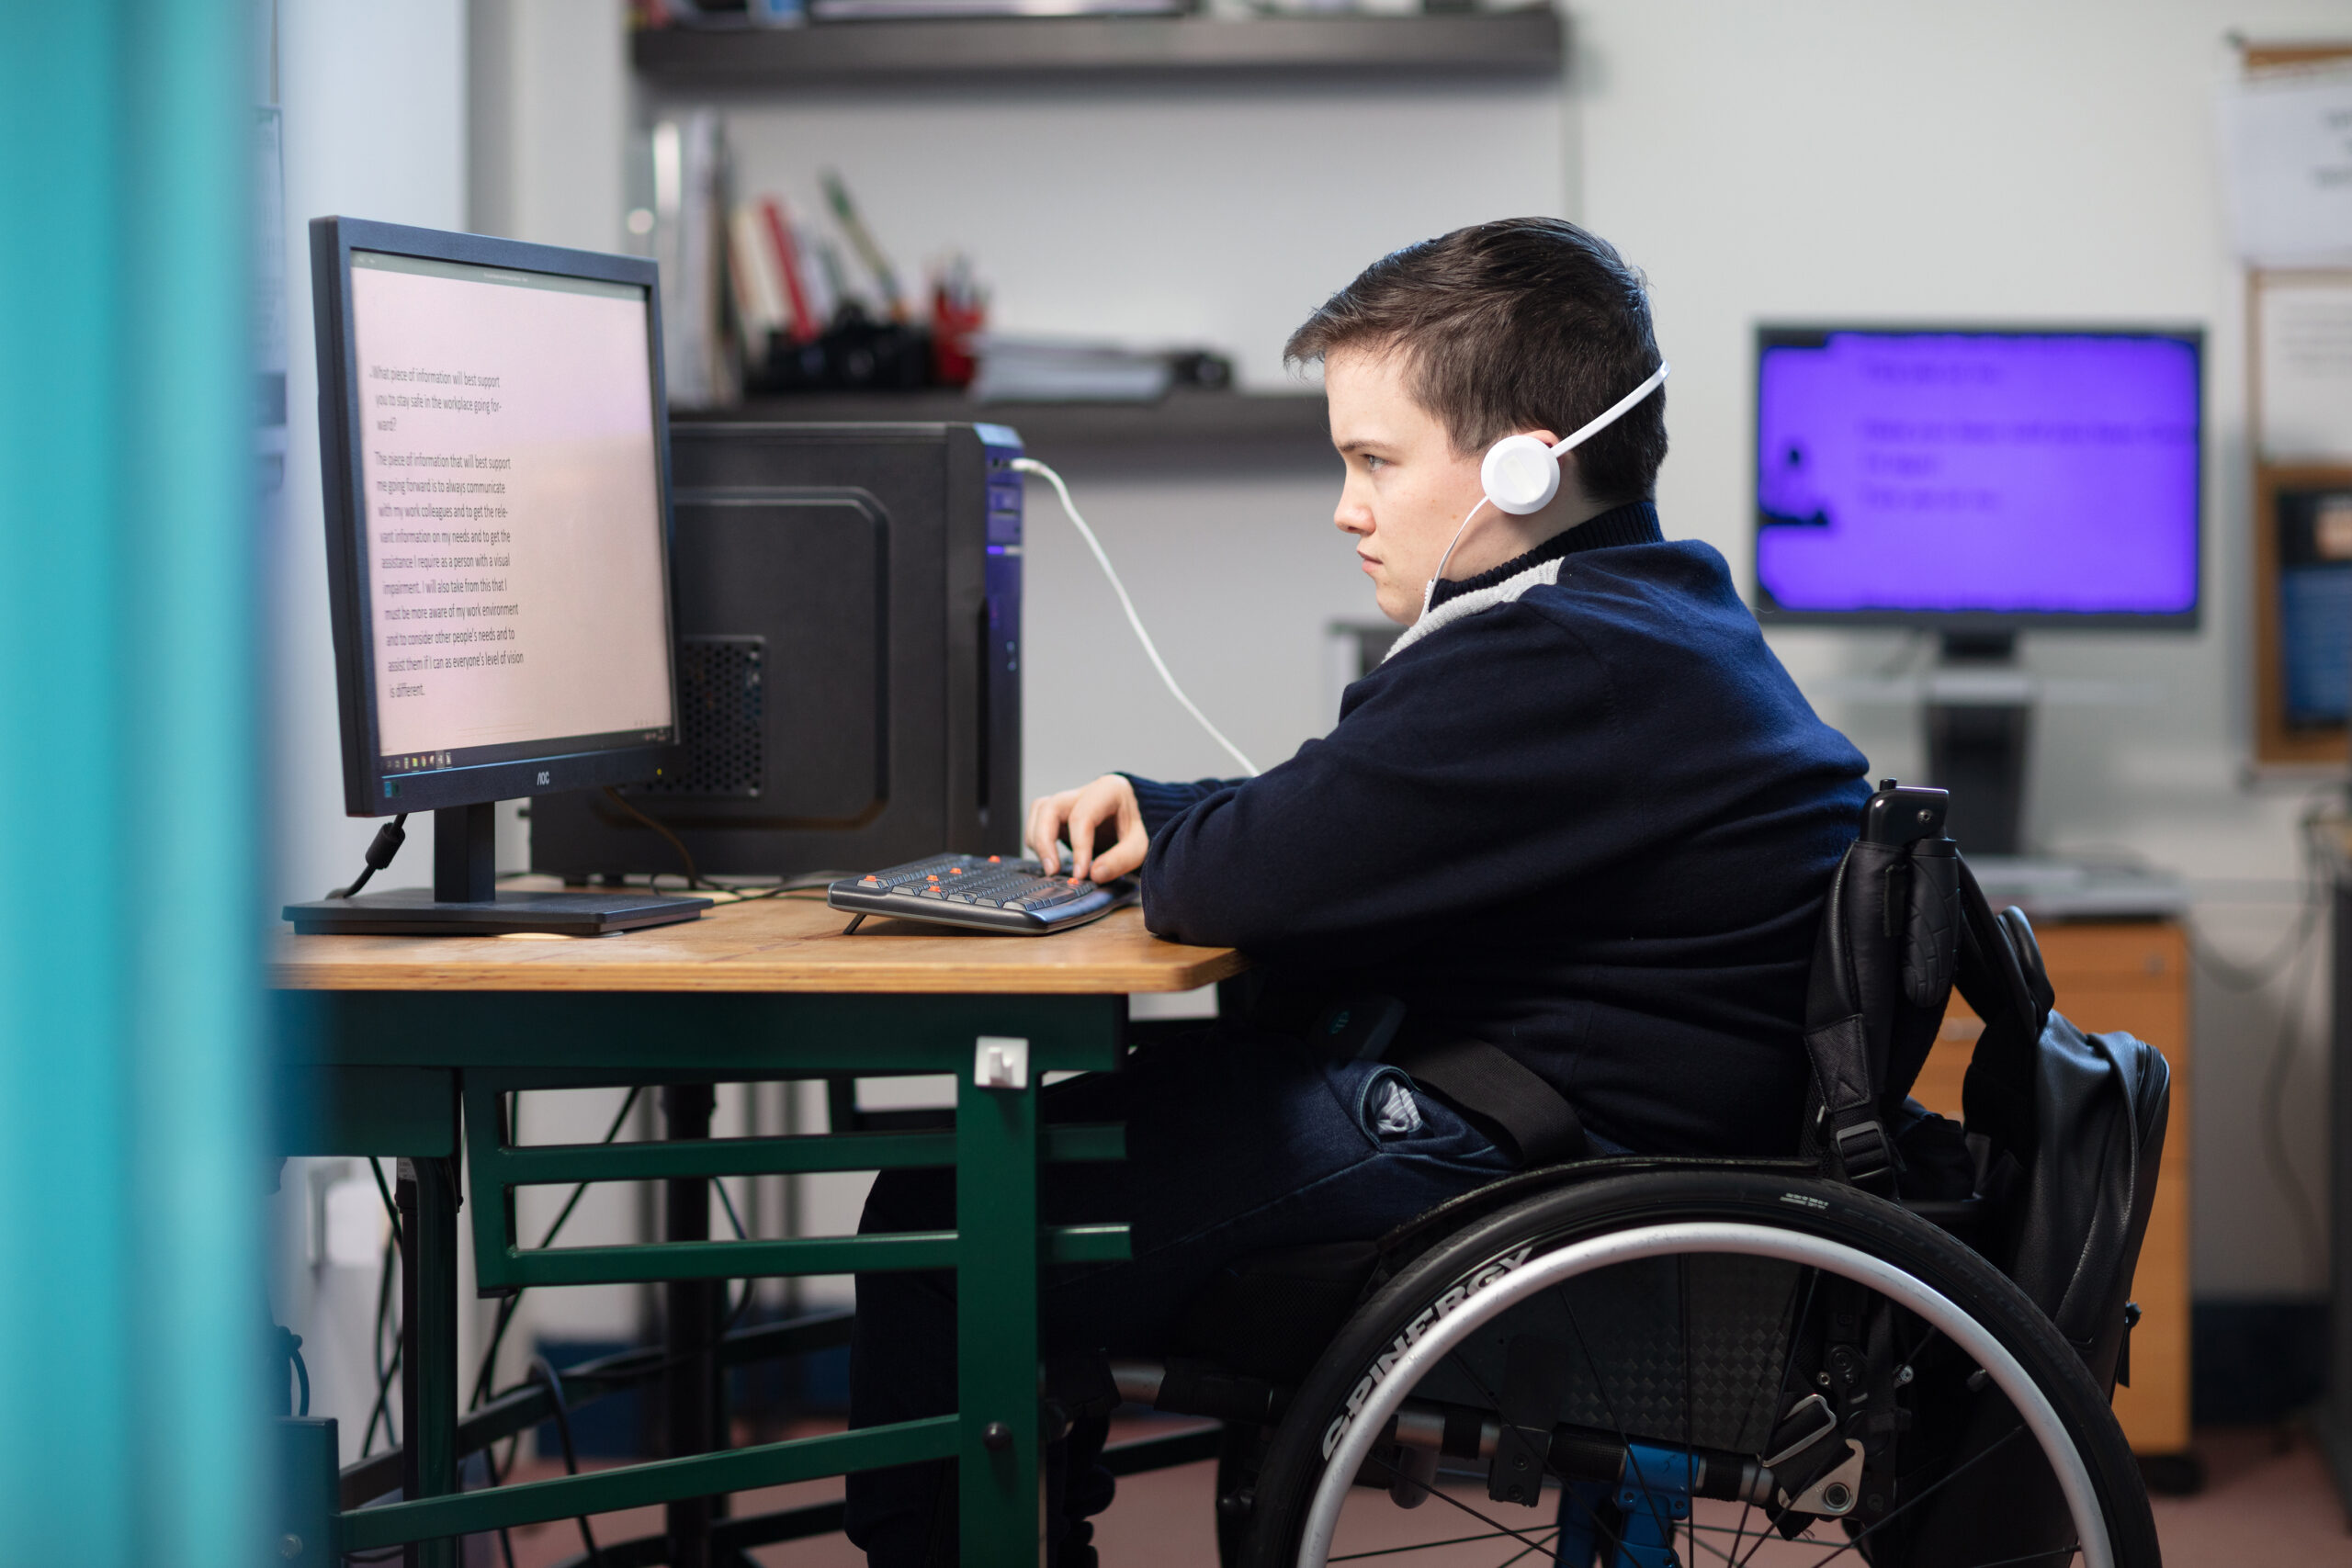 A young man in a wheelchair is sitting at a desk with headphones on and is working on a desktop computer in front of him.